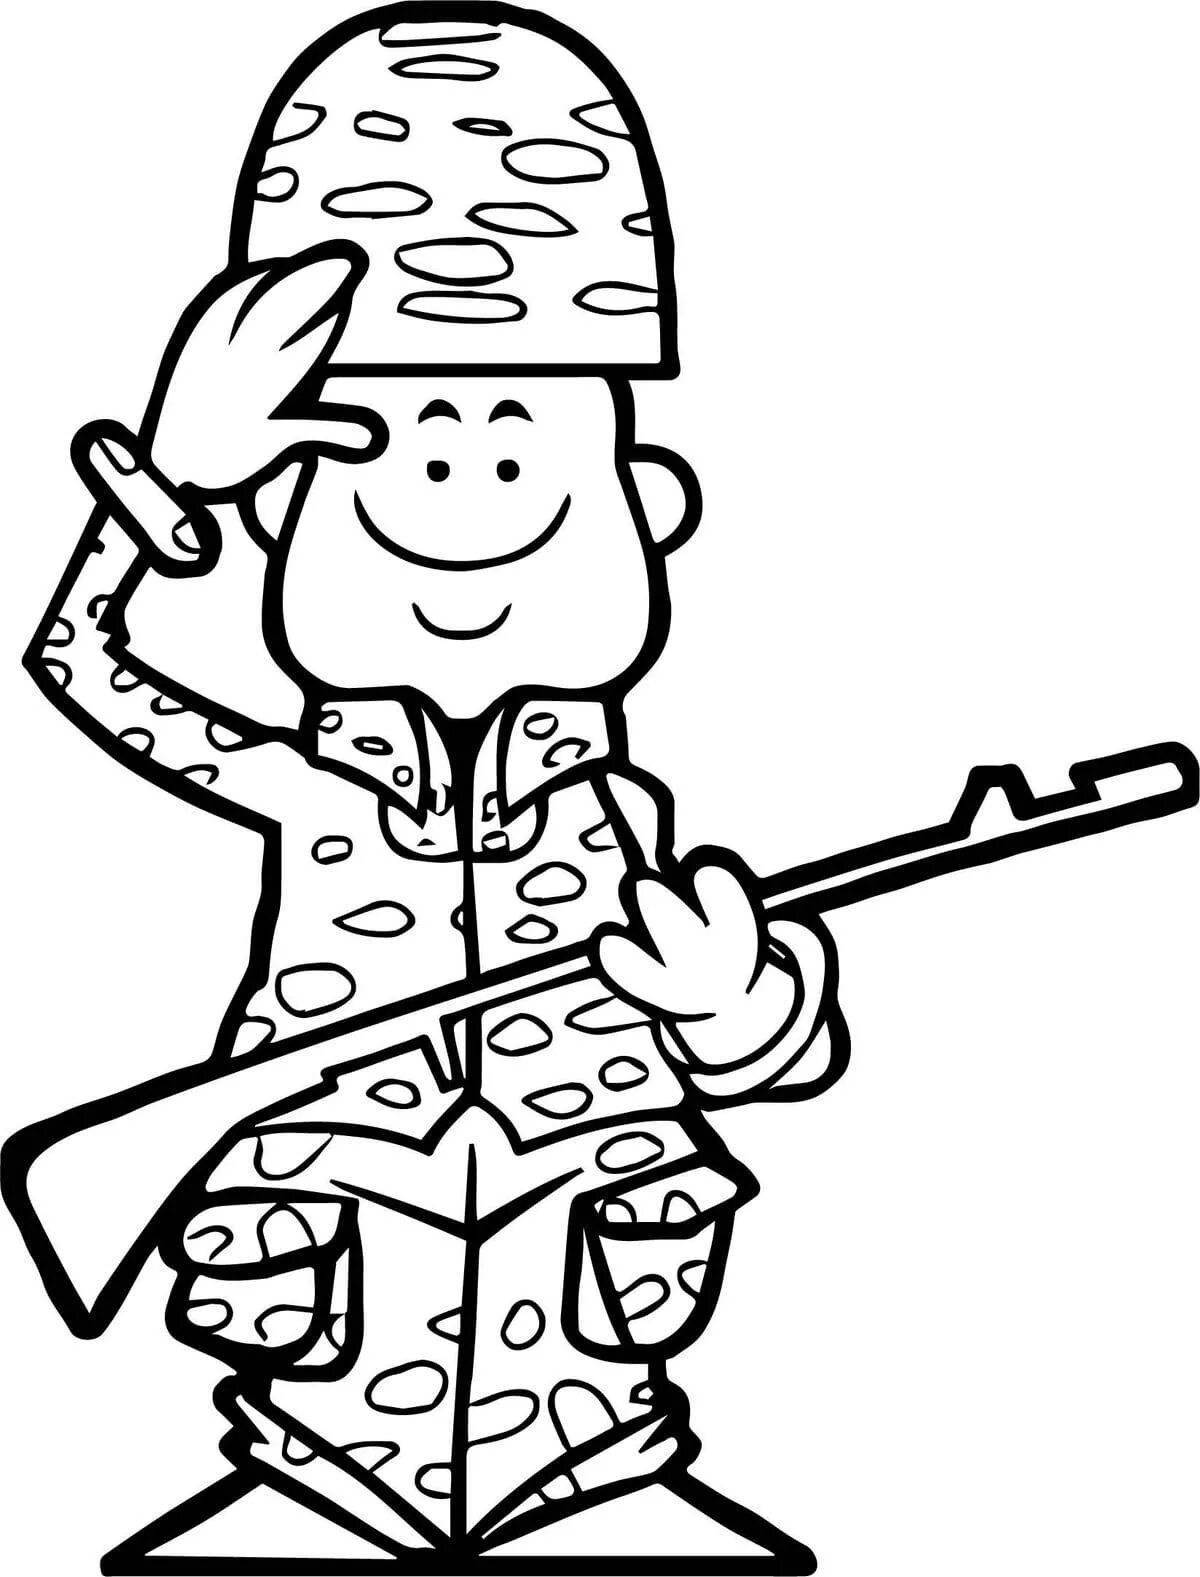 Fine toy soldiers coloring pages for kids